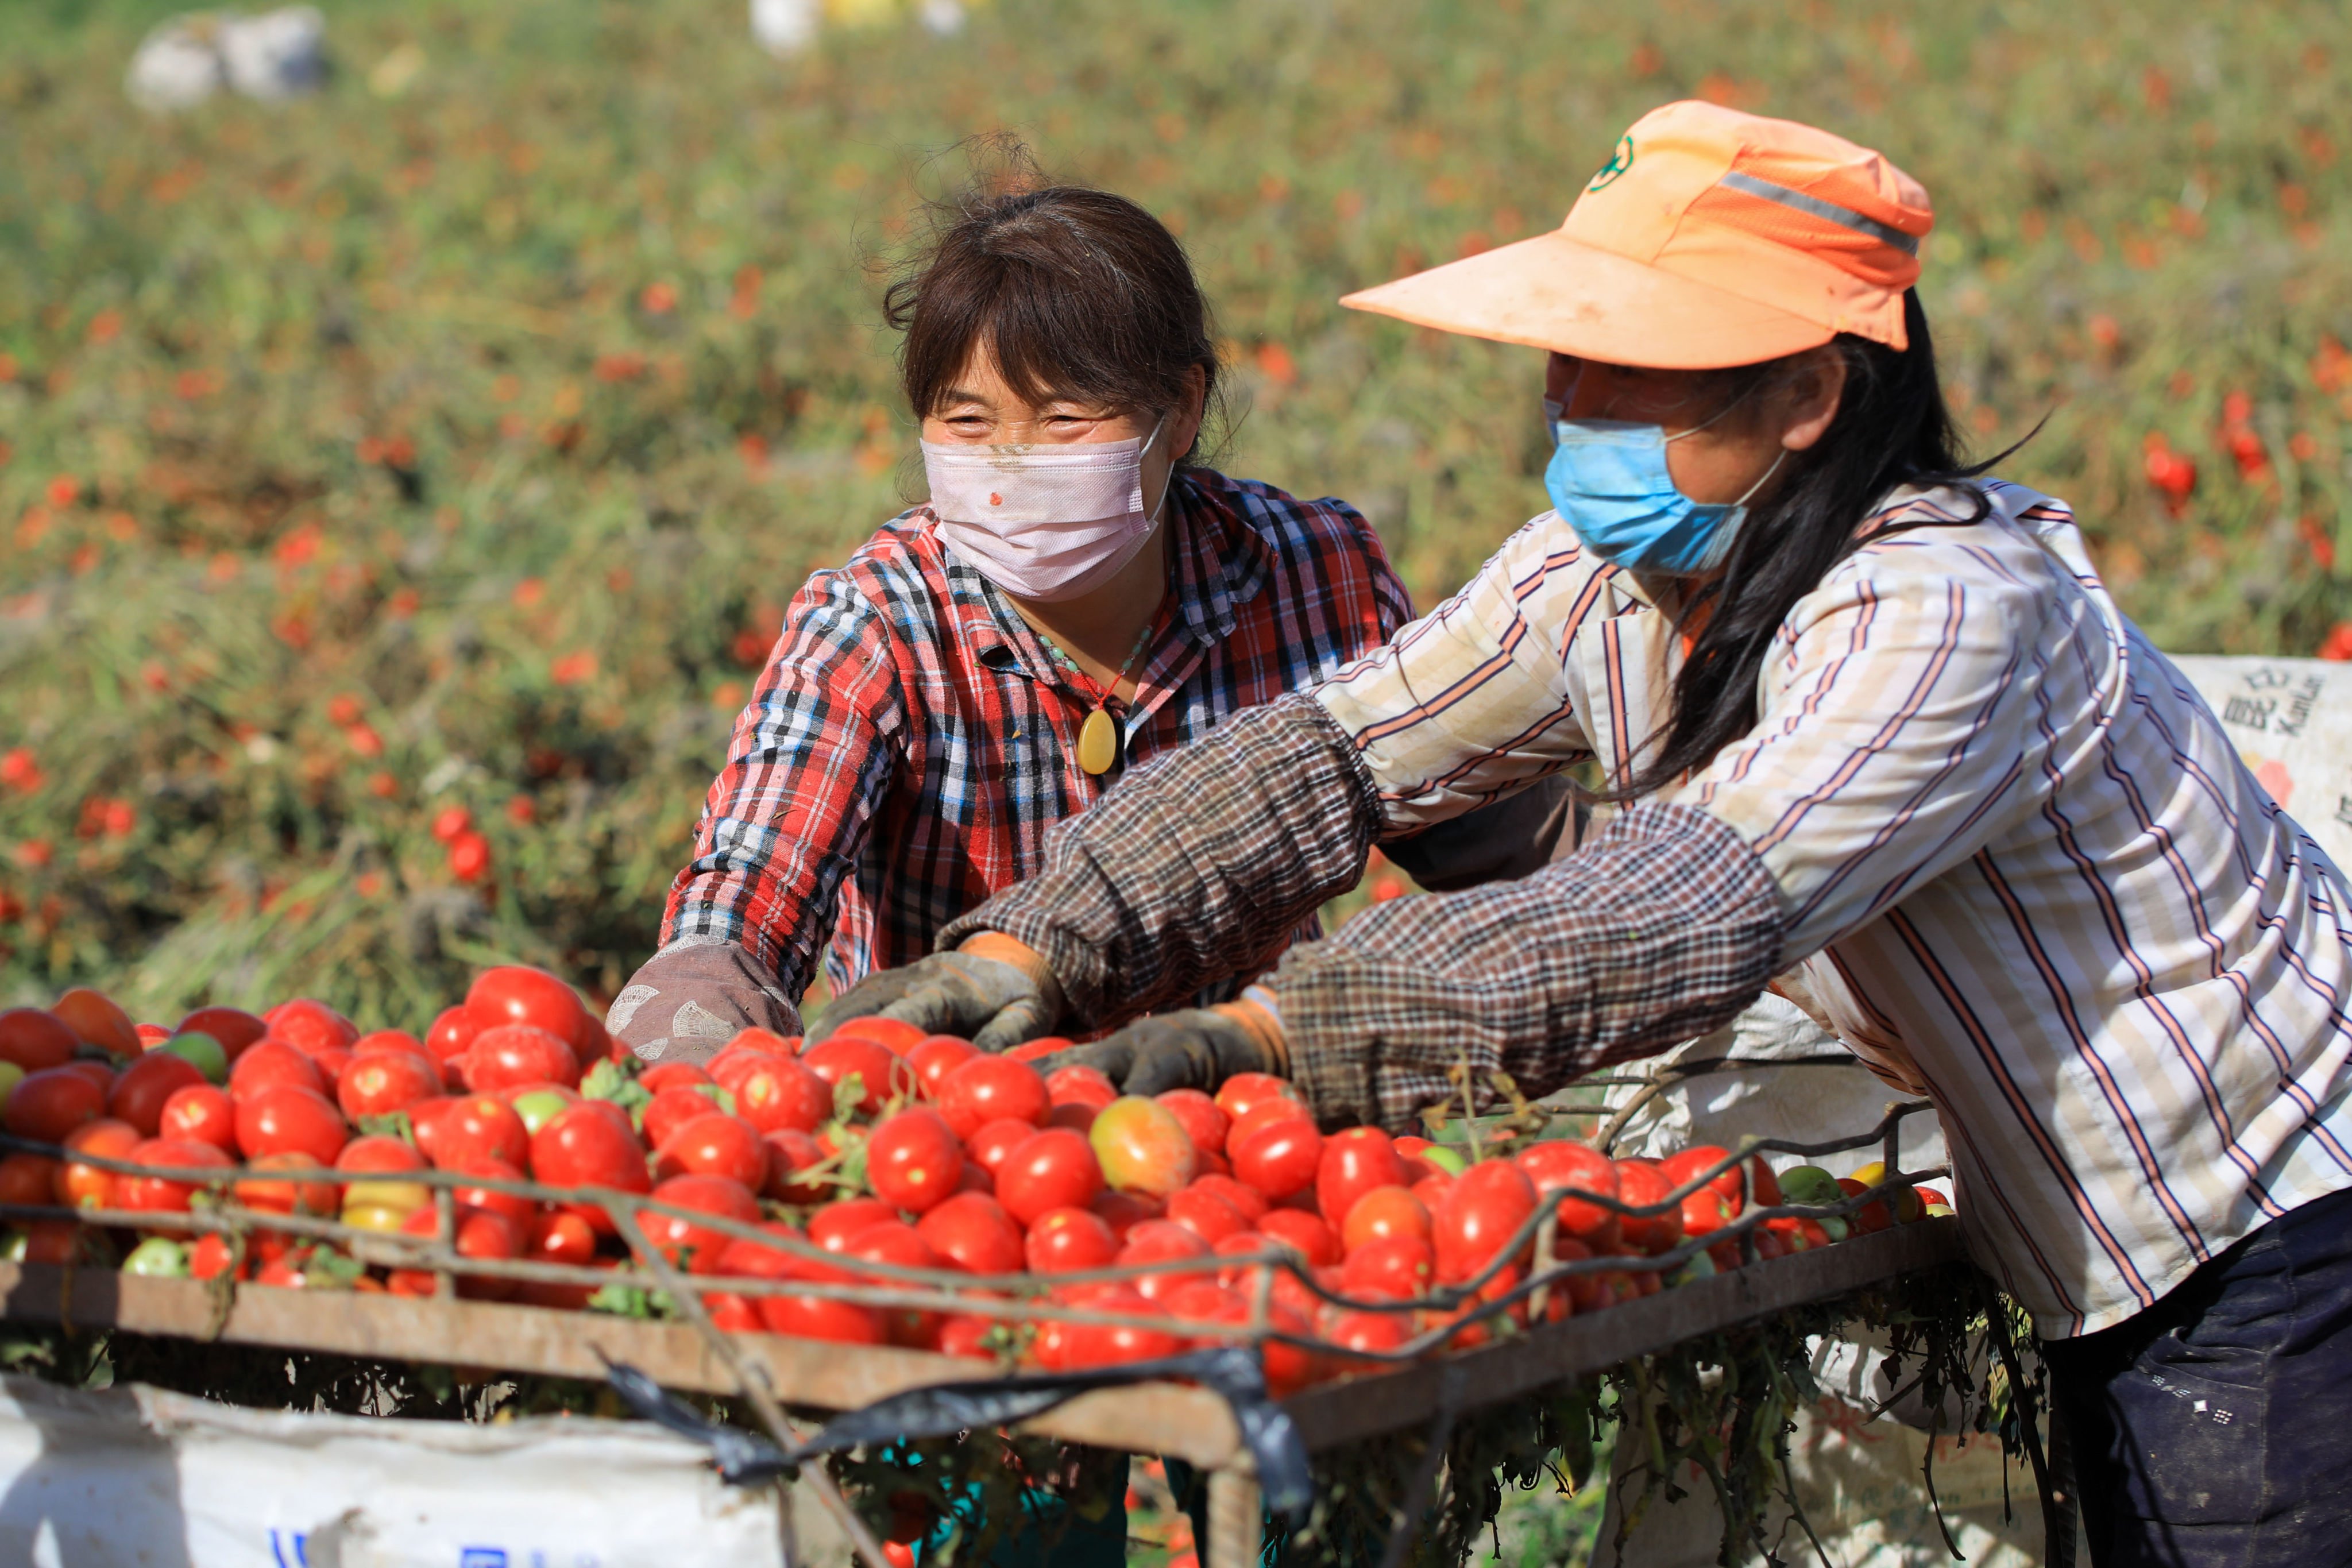 China’s Xinjiang Uygur autonomous region is known as a production hub for goods ranging from agricultural staples such as cotton and tomatoes to materials including viscose and polysilicon. Photo: Xinhua